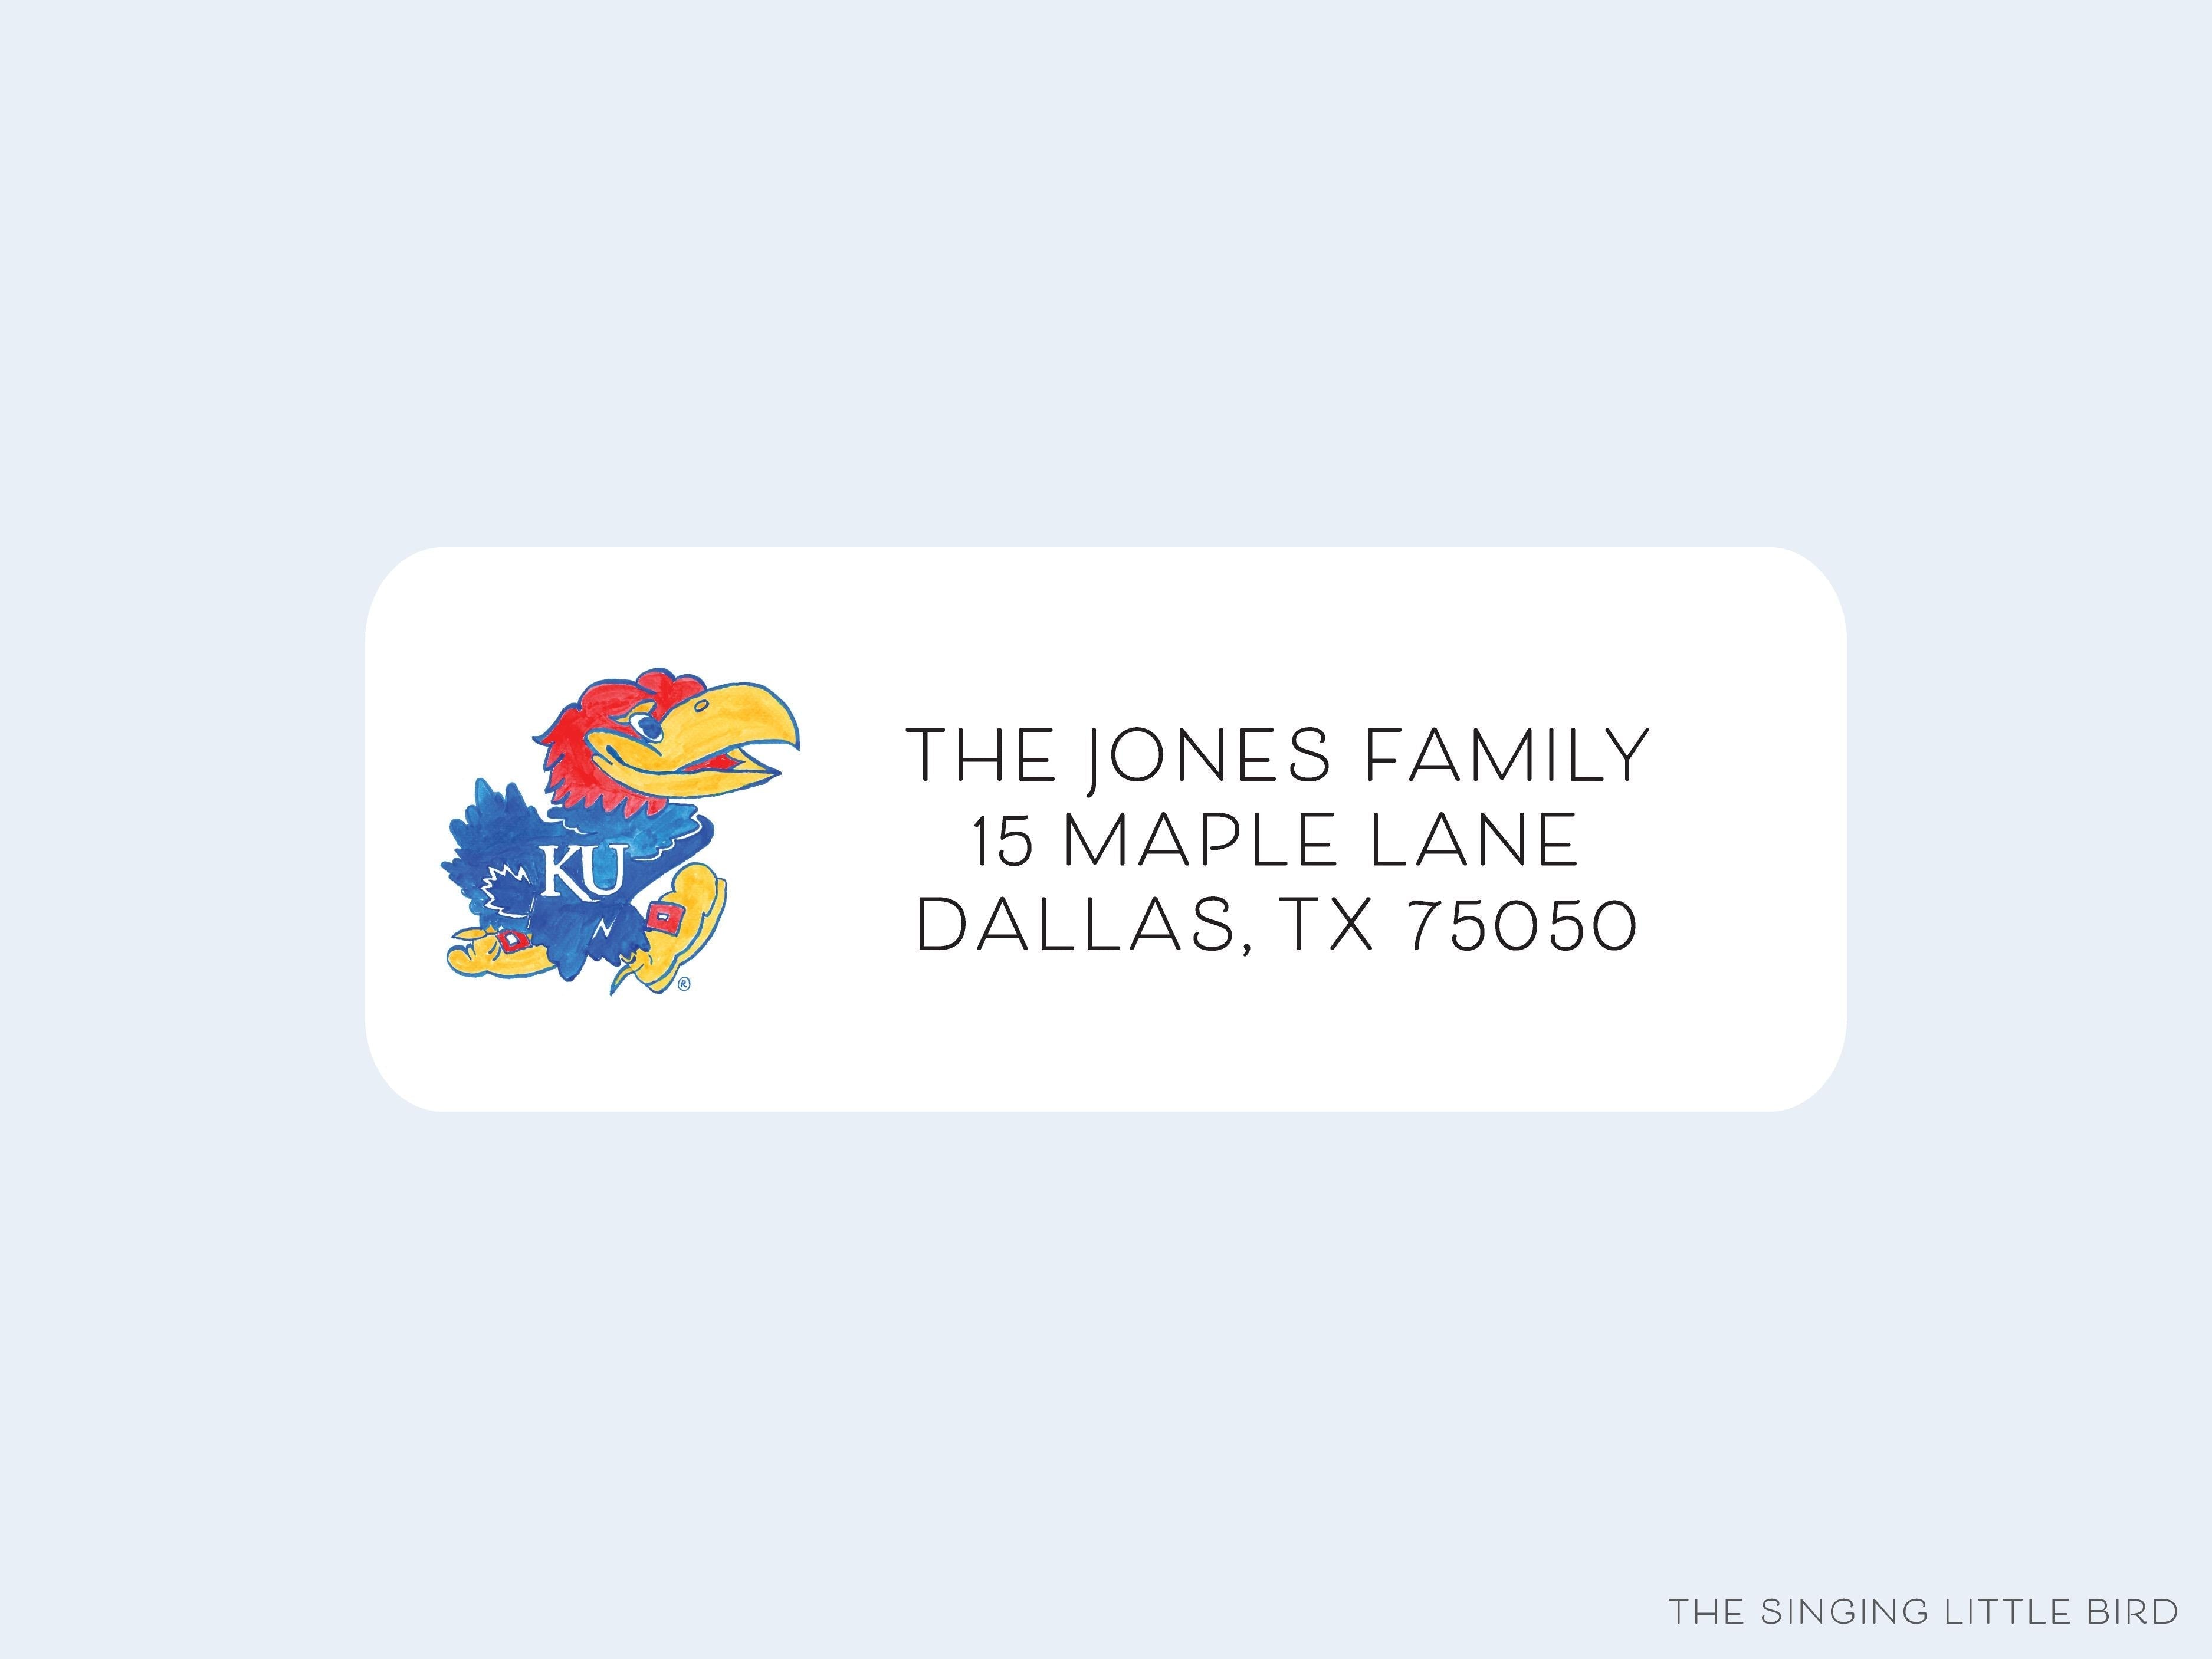 Kansas Jayhawk Return Address Labels [Officially Licensed]-These personalized return address labels are 2.625" x 1" and feature our hand-painted watercolor Jayhawk, printed in the USA on beautiful matte finish labels. These make great gifts for yourself or the University of Kansas lover.-The Singing Little Bird